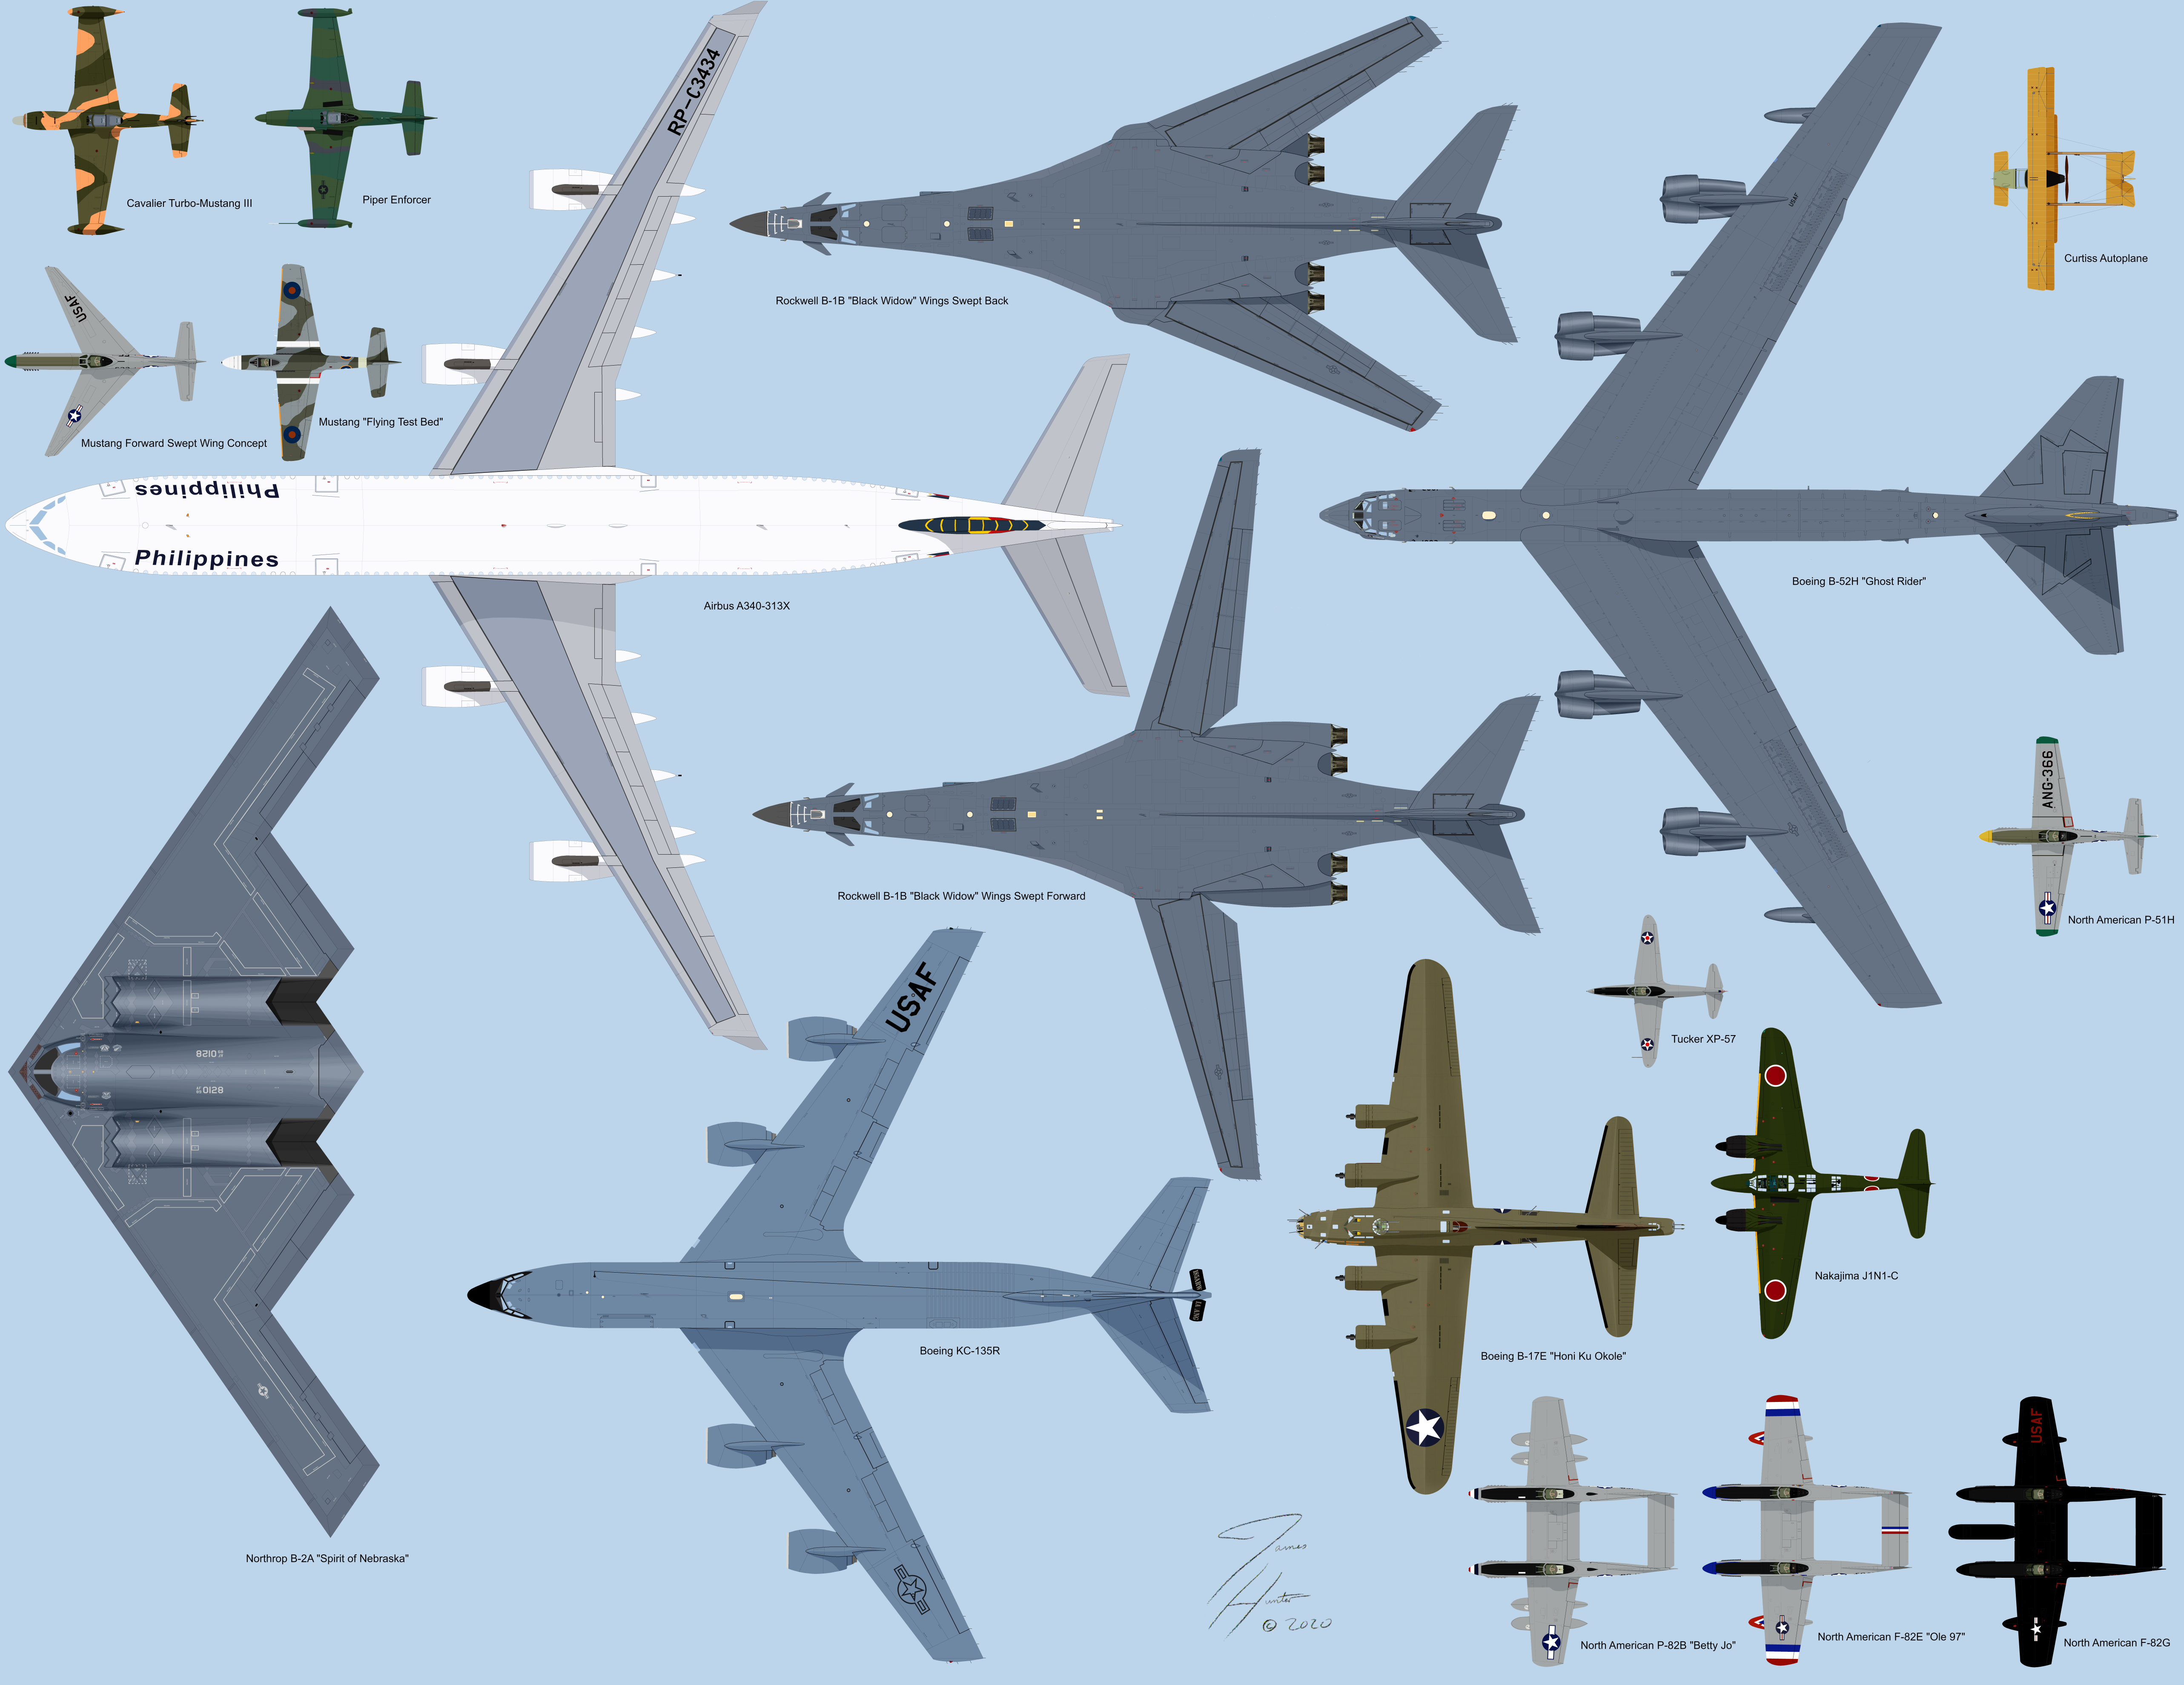 All My Planes Top Size Comparison 2020 by Great-Jimbo on DeviantArt